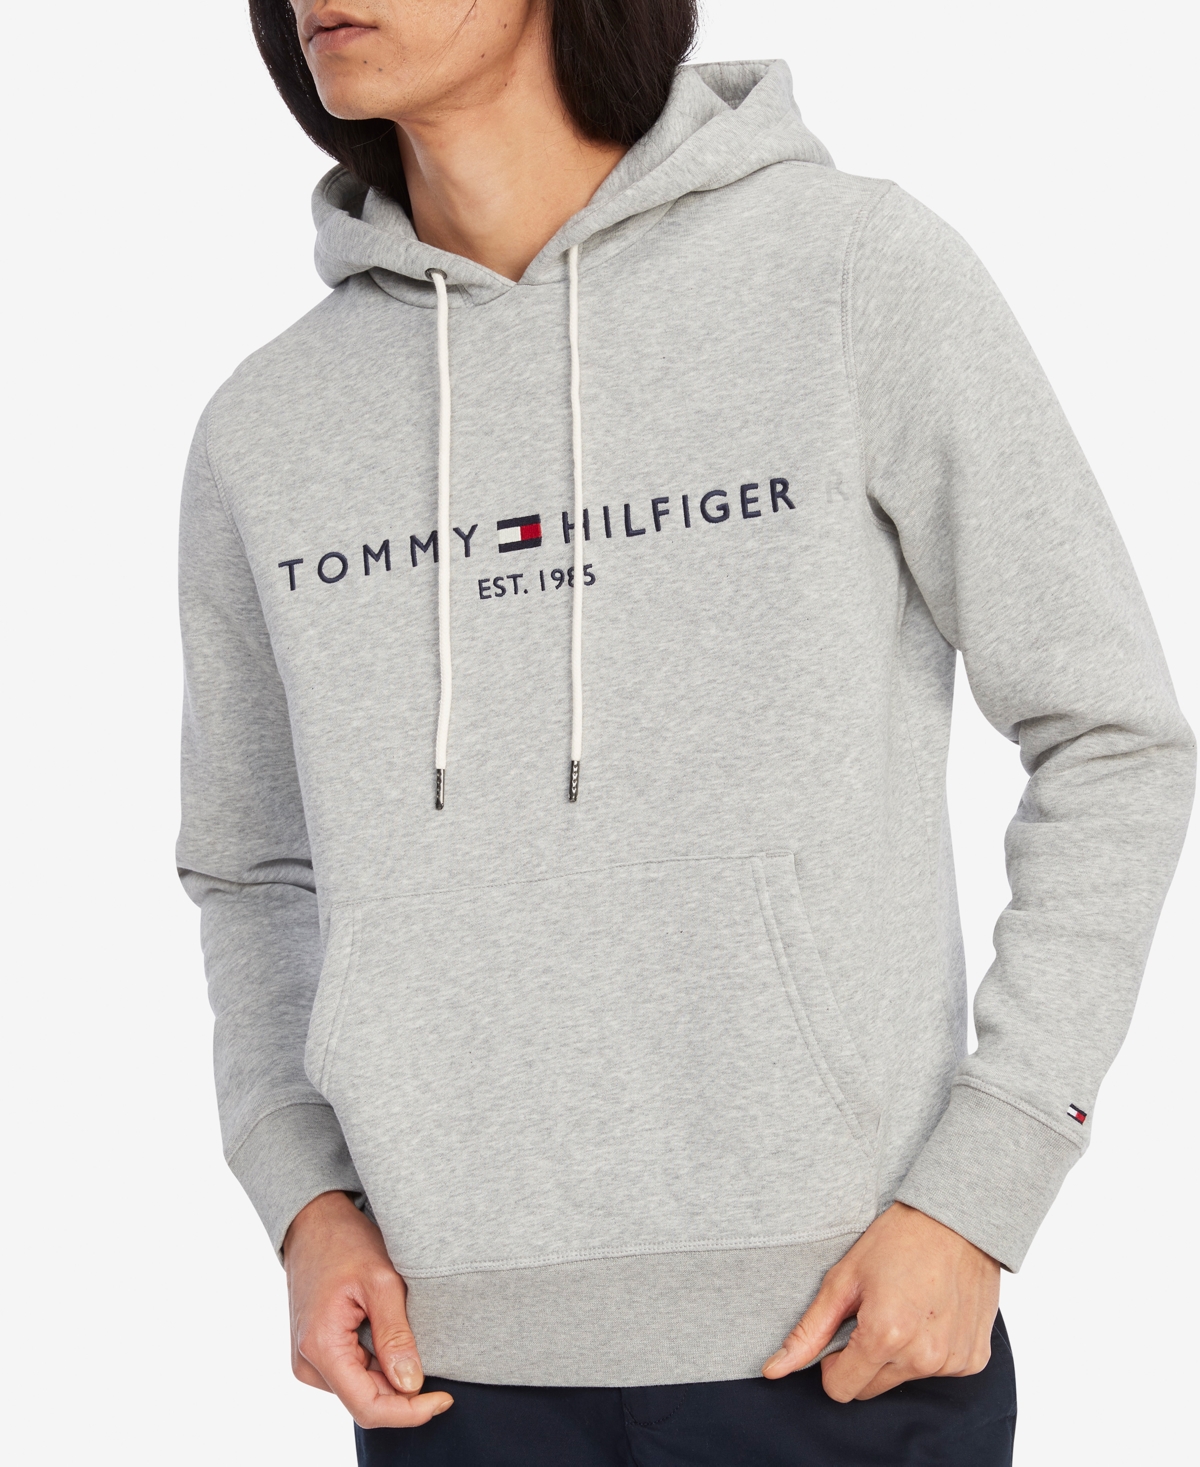 Tommy Hilfiger Womens Est. 1985 Pullover Hoodie